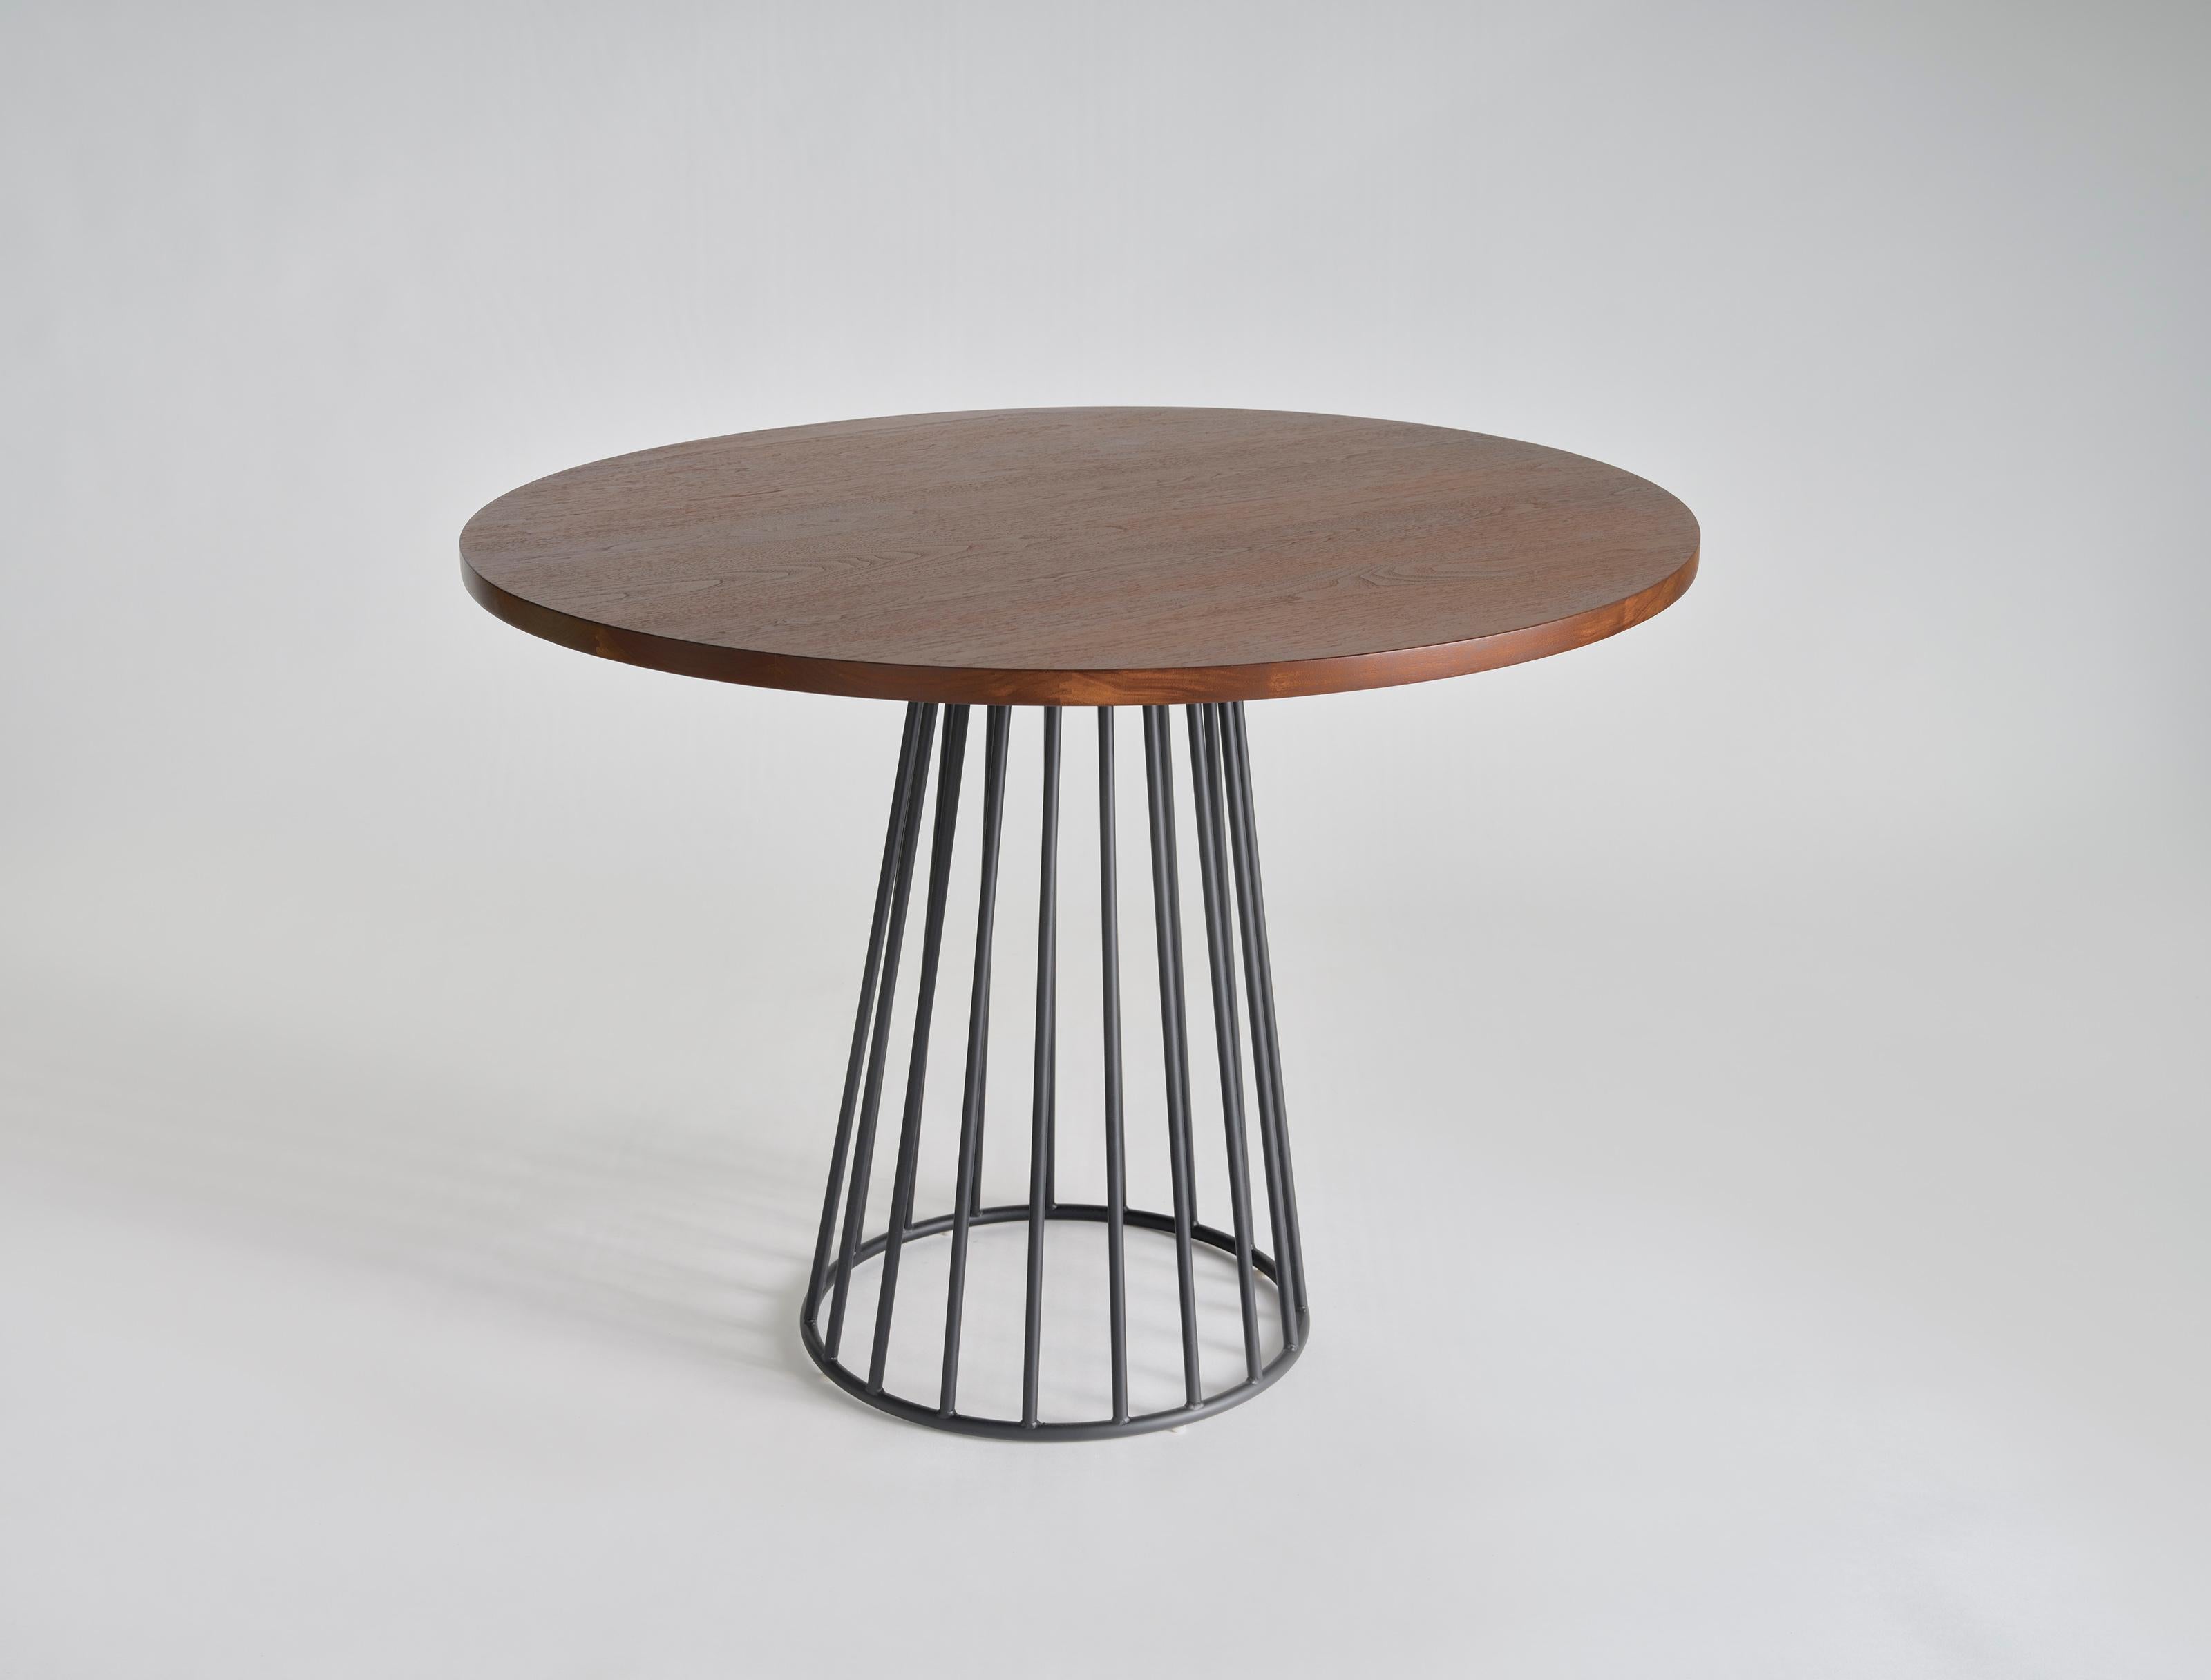 Powder-Coated Wired Café Table by Phase Design For Sale